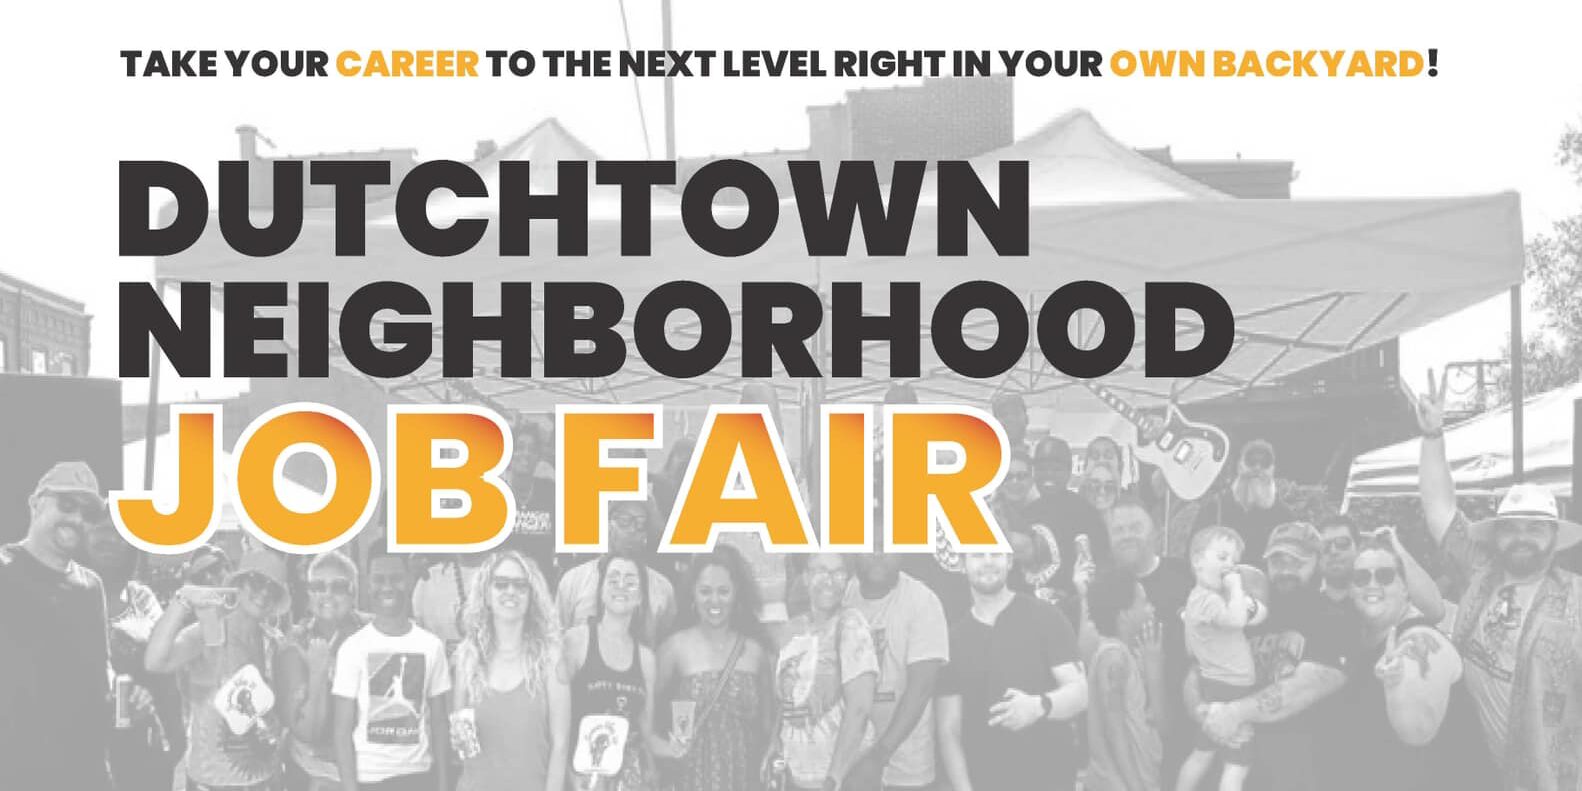 Take your career to the next level right in your own backyard at the Dutchtown Neighborhood Job Fair